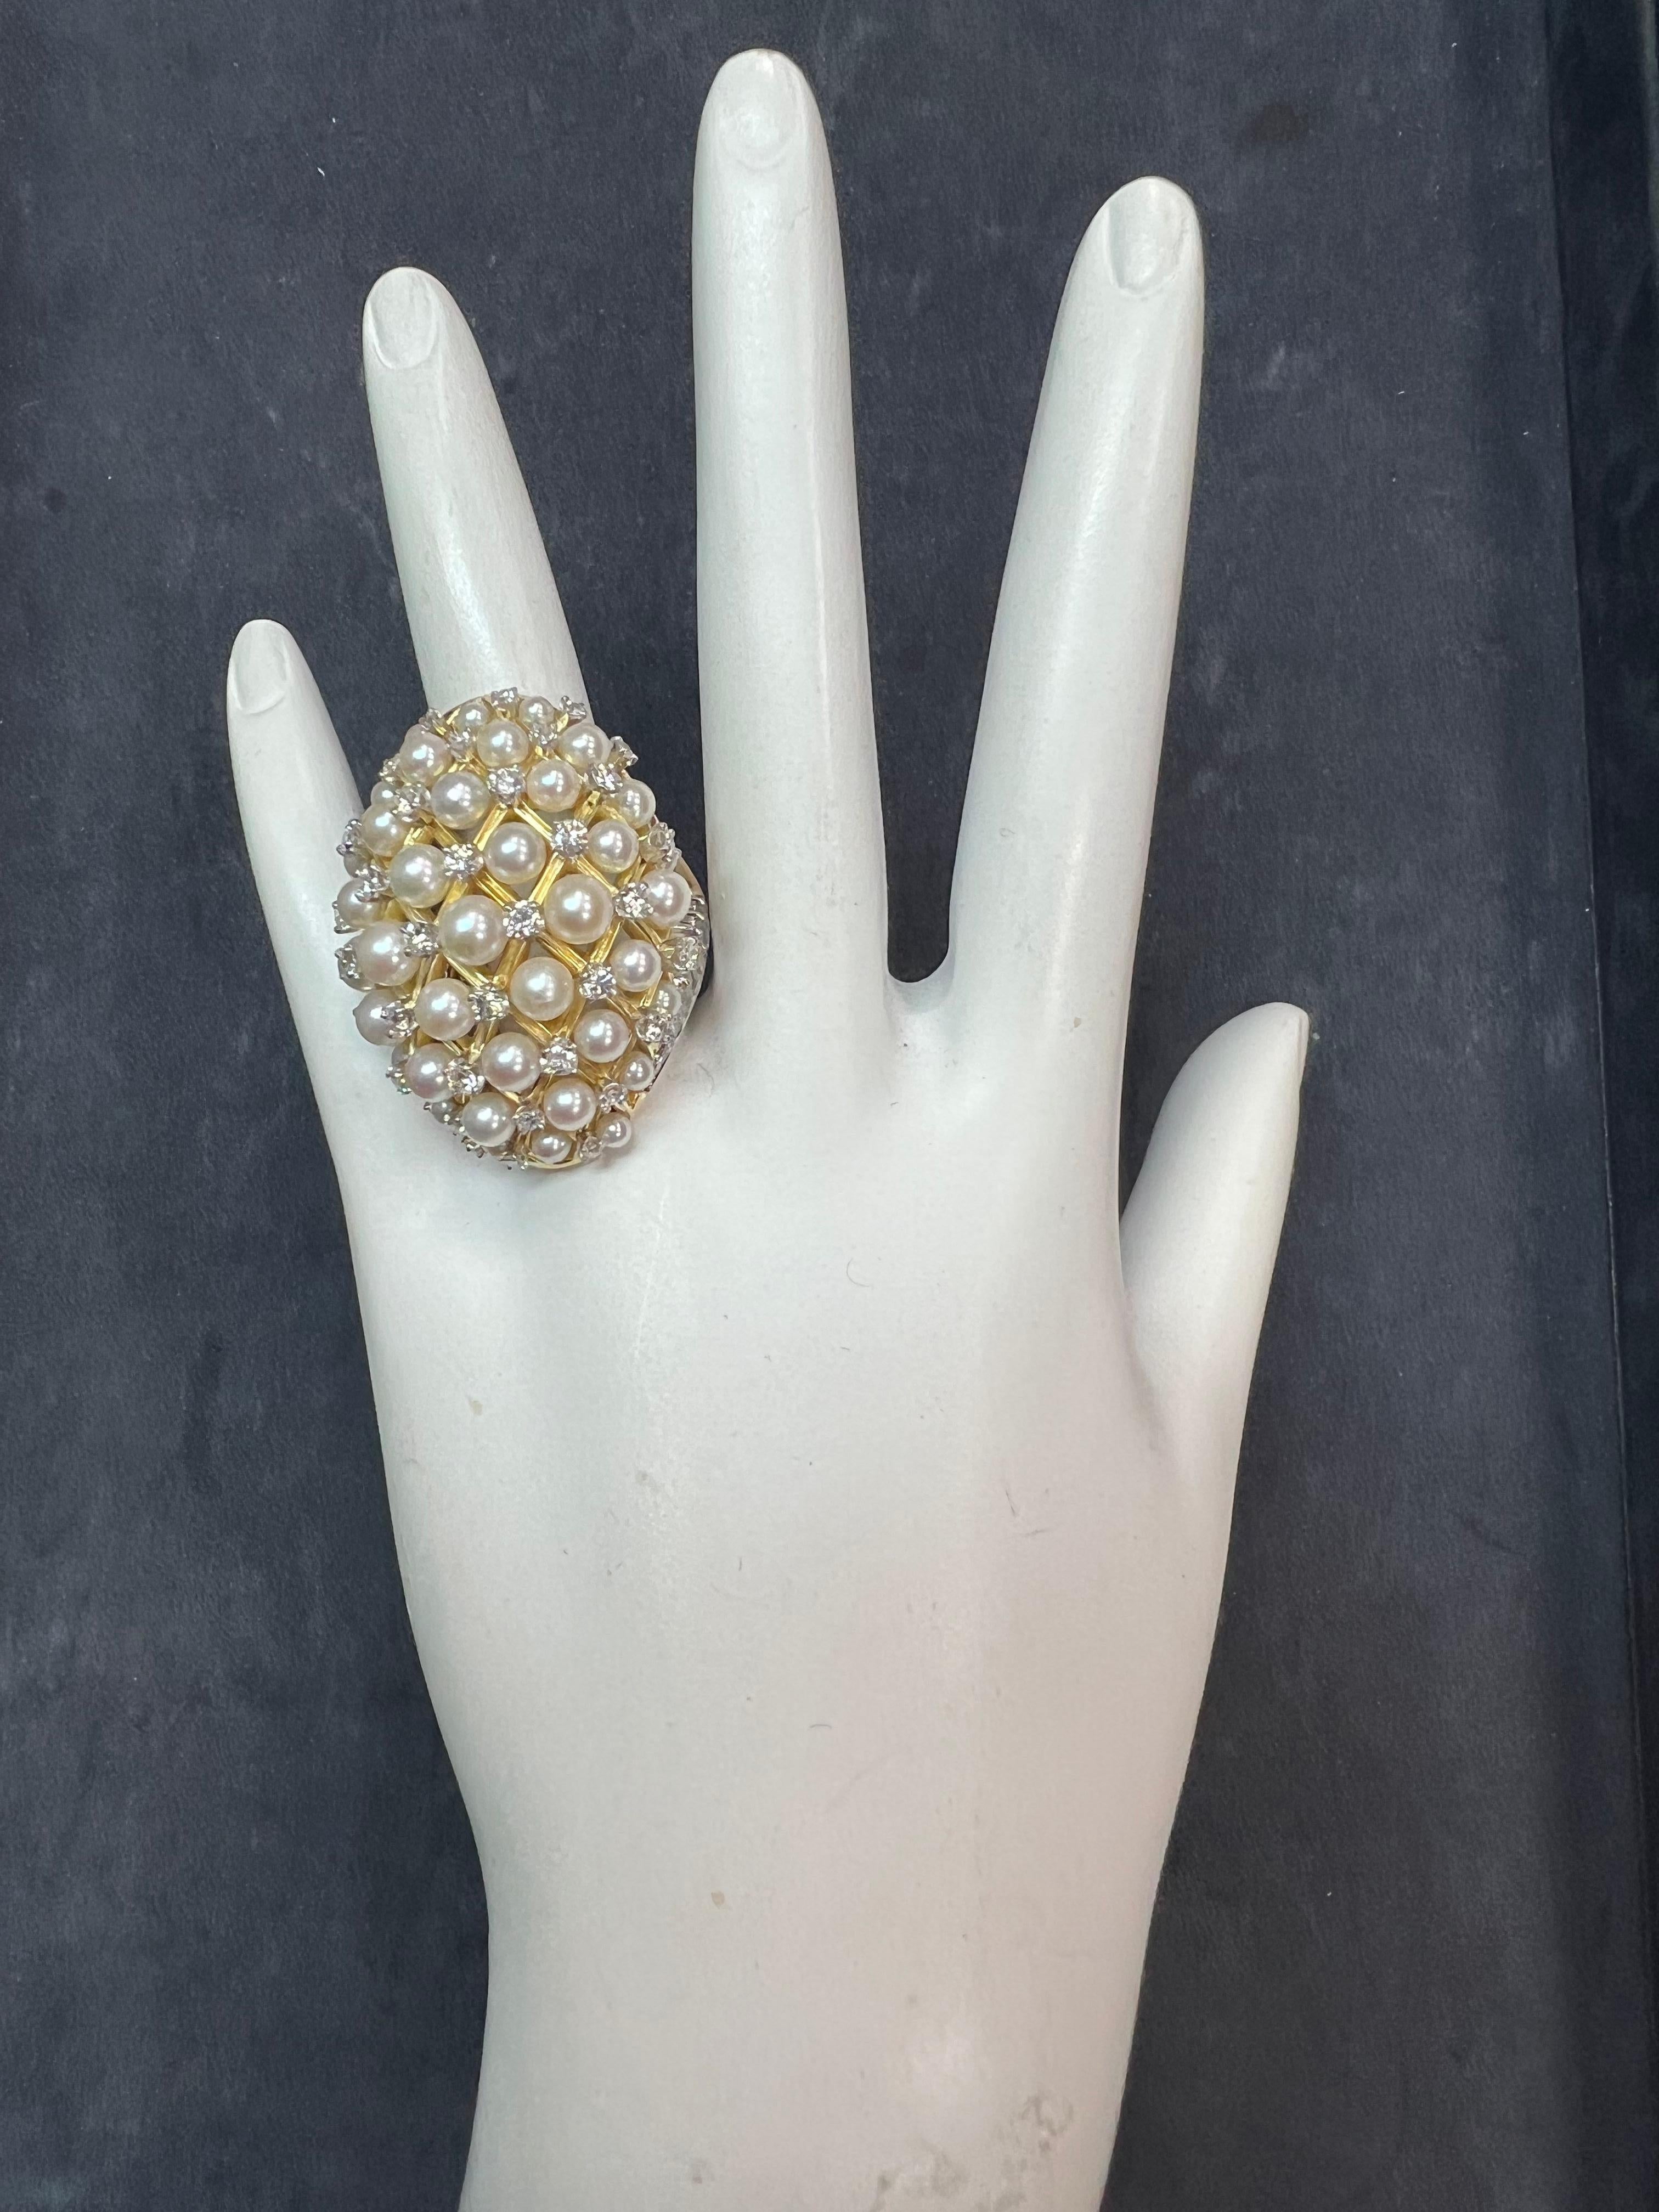 Retro Gold 2.52 Carat Natural Colorless Diamond & Pearl Cocktail Ring Circa 1960 For Sale 4